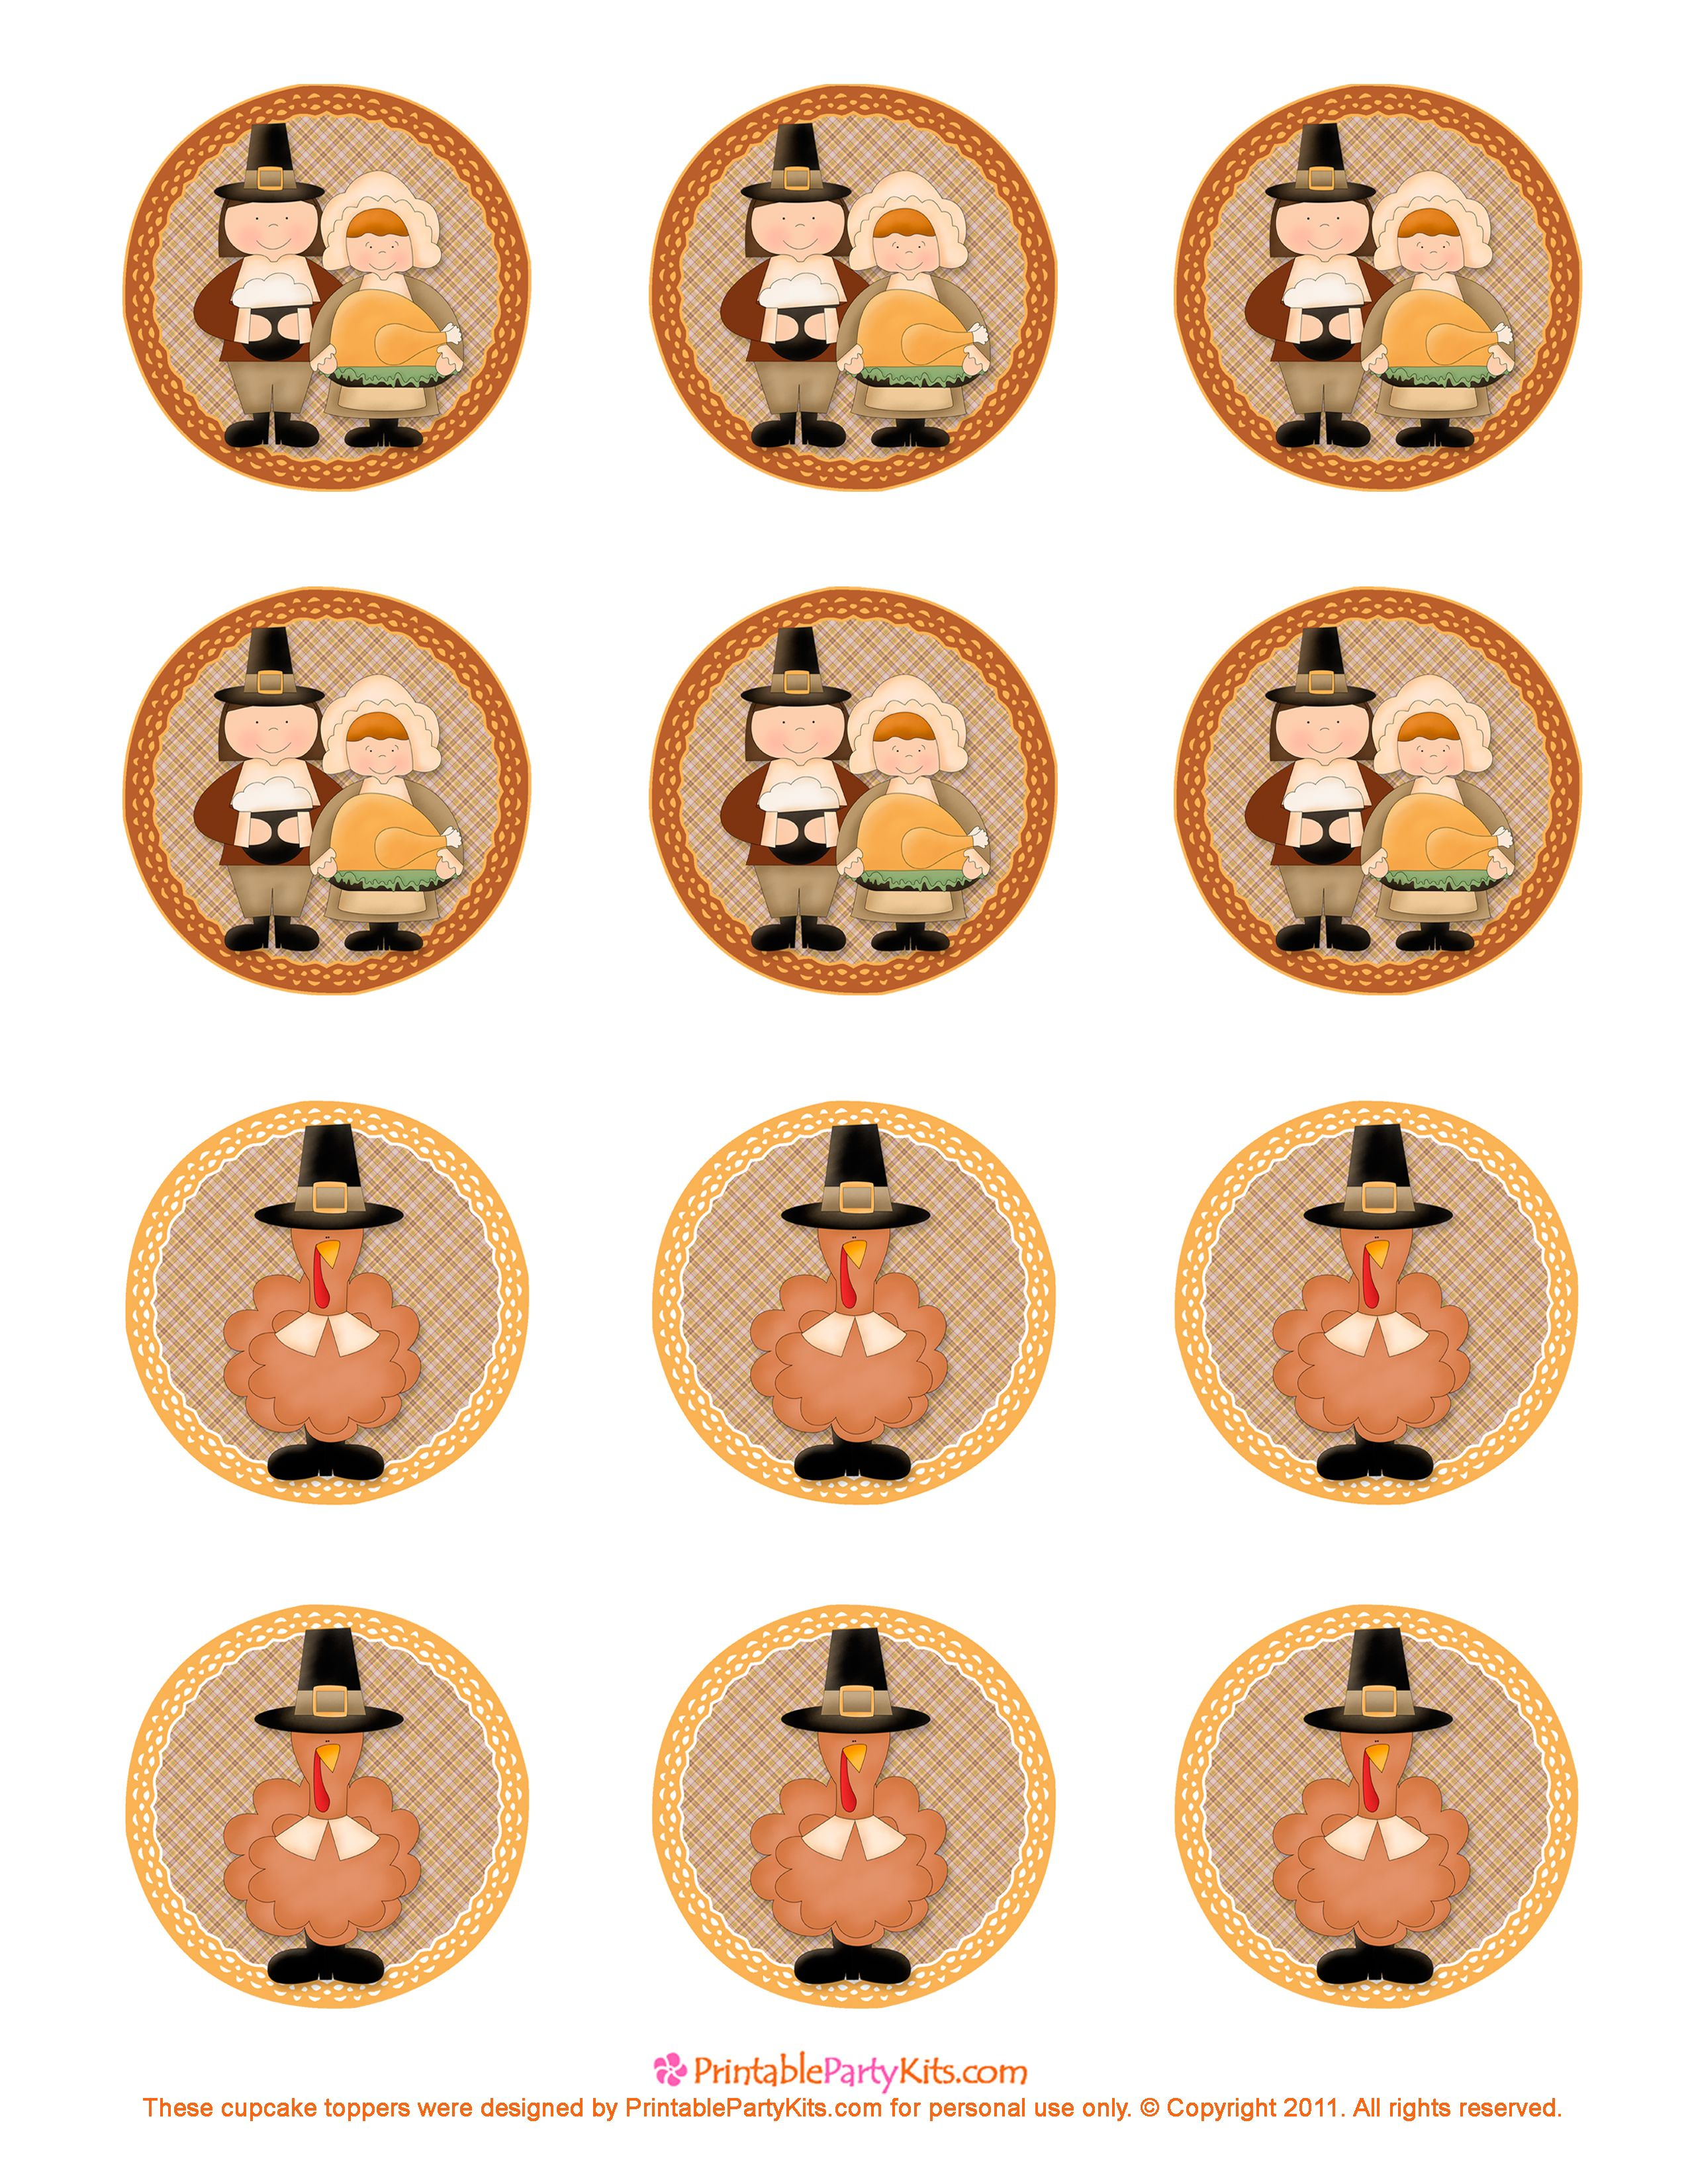 Pinlola Schultz On One Inch Bottle Caps | Pinterest - Thanksgiving Cupcake Toppers Printable Free